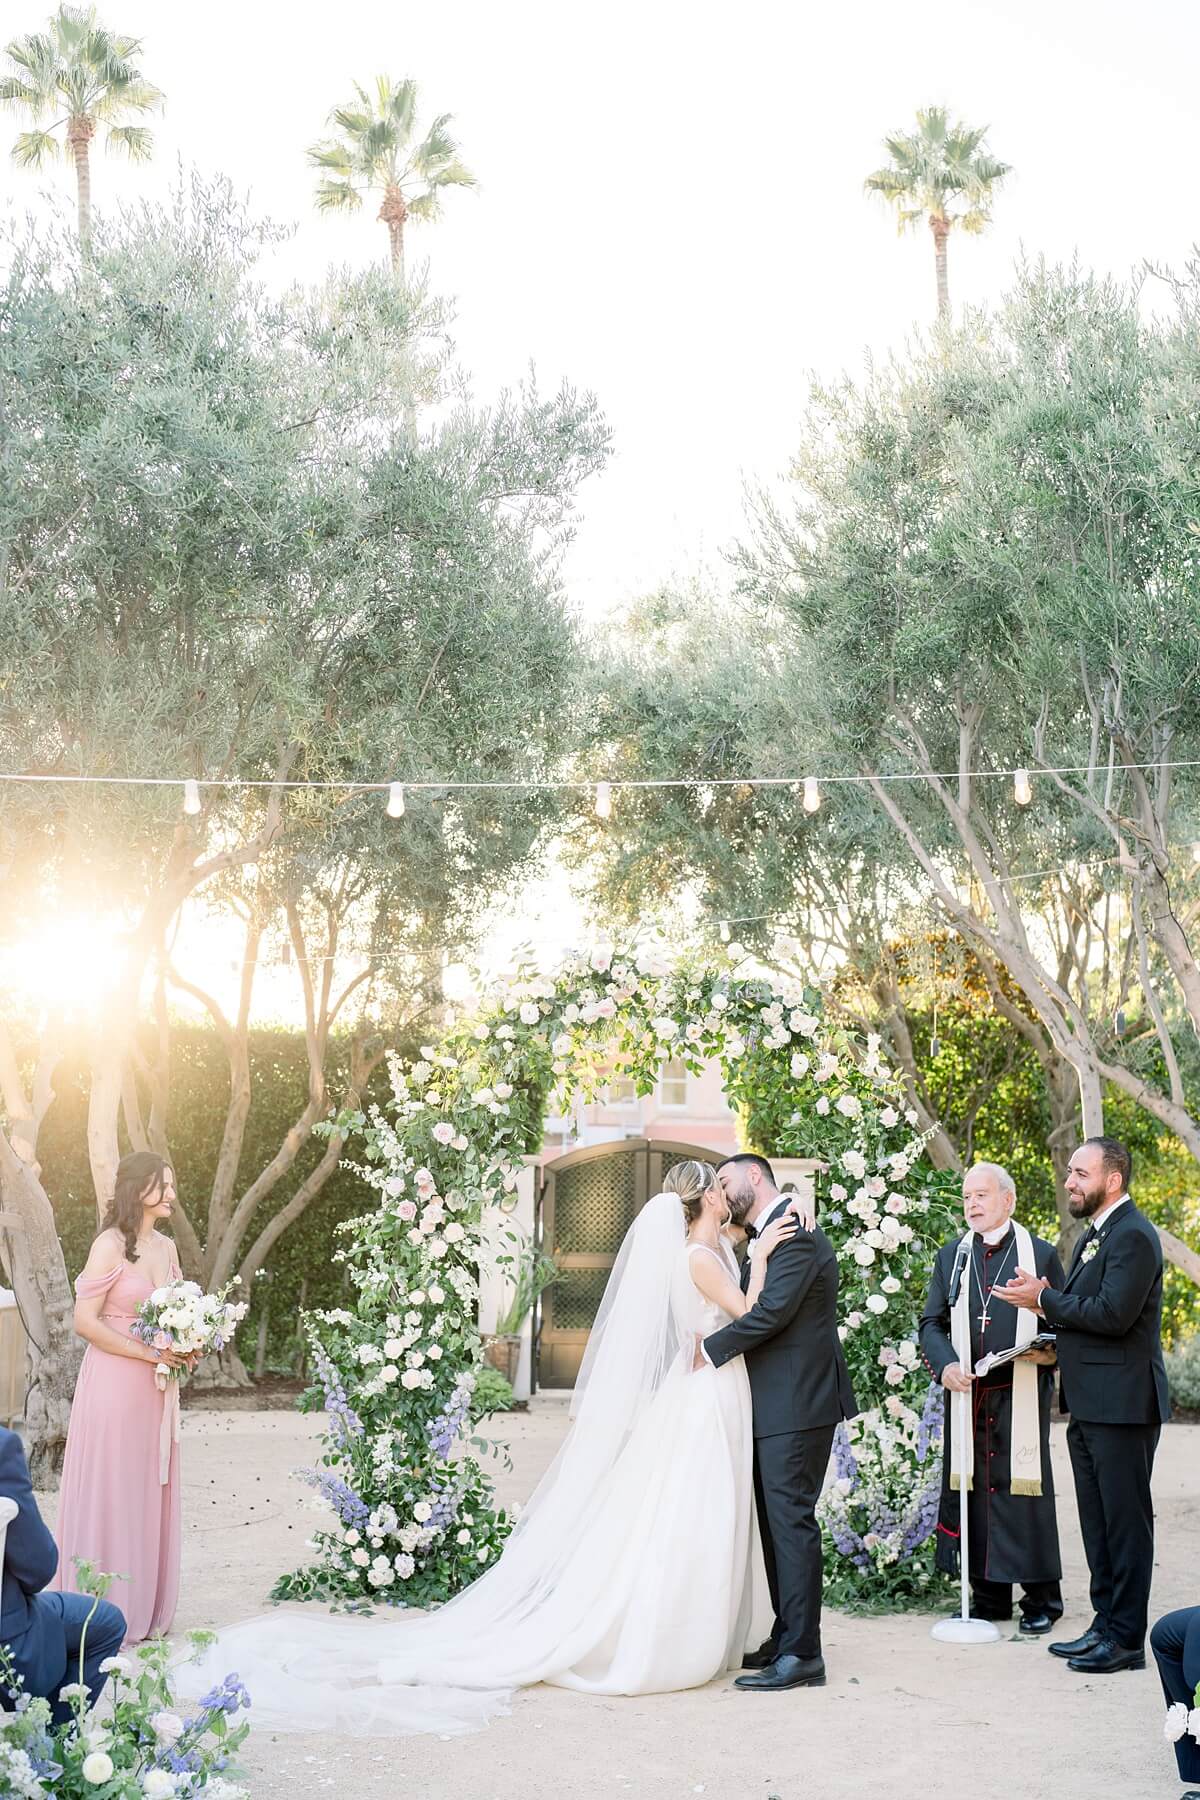 Olive grove outdoor wedding ceremony in Southern California with floral arch and black tie wedding guests captured by award-winning SoCal wedding photographer Pattengale Photography